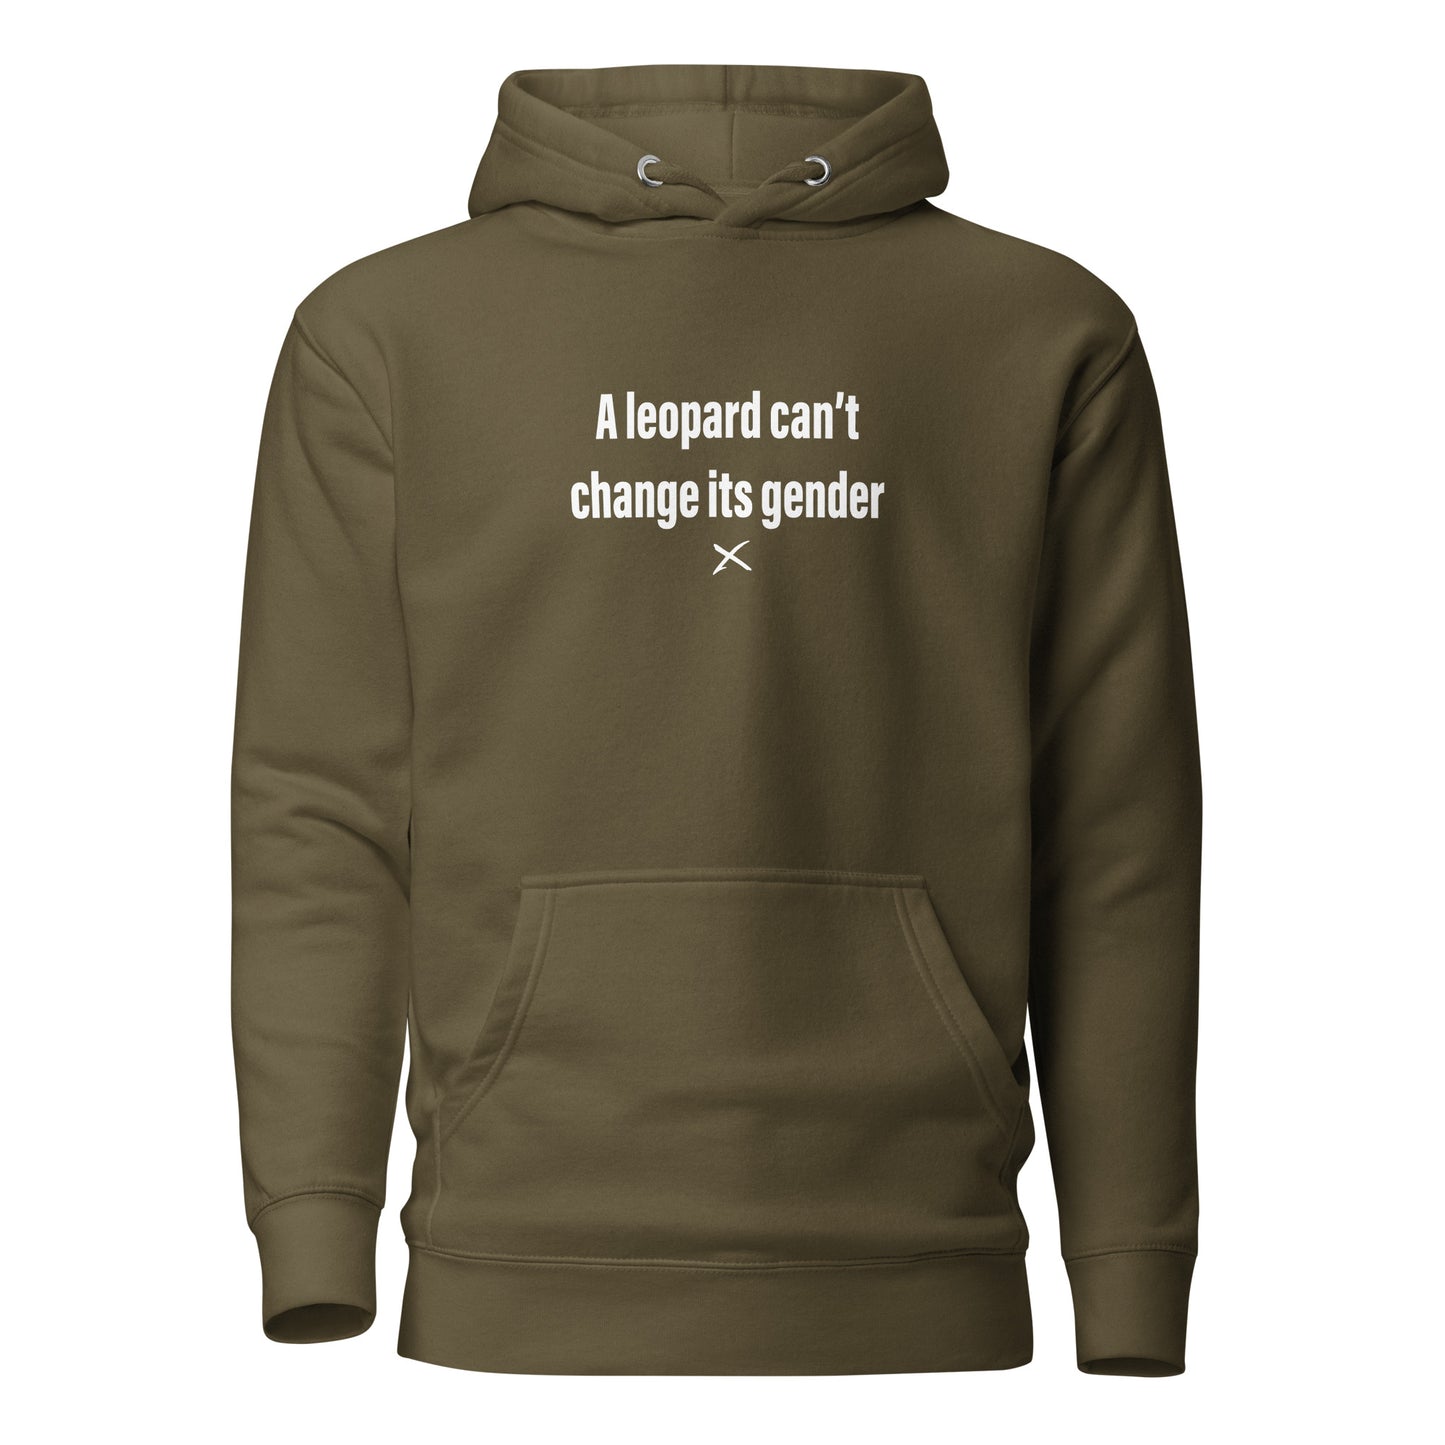 A leopard can't change its gender - Hoodie